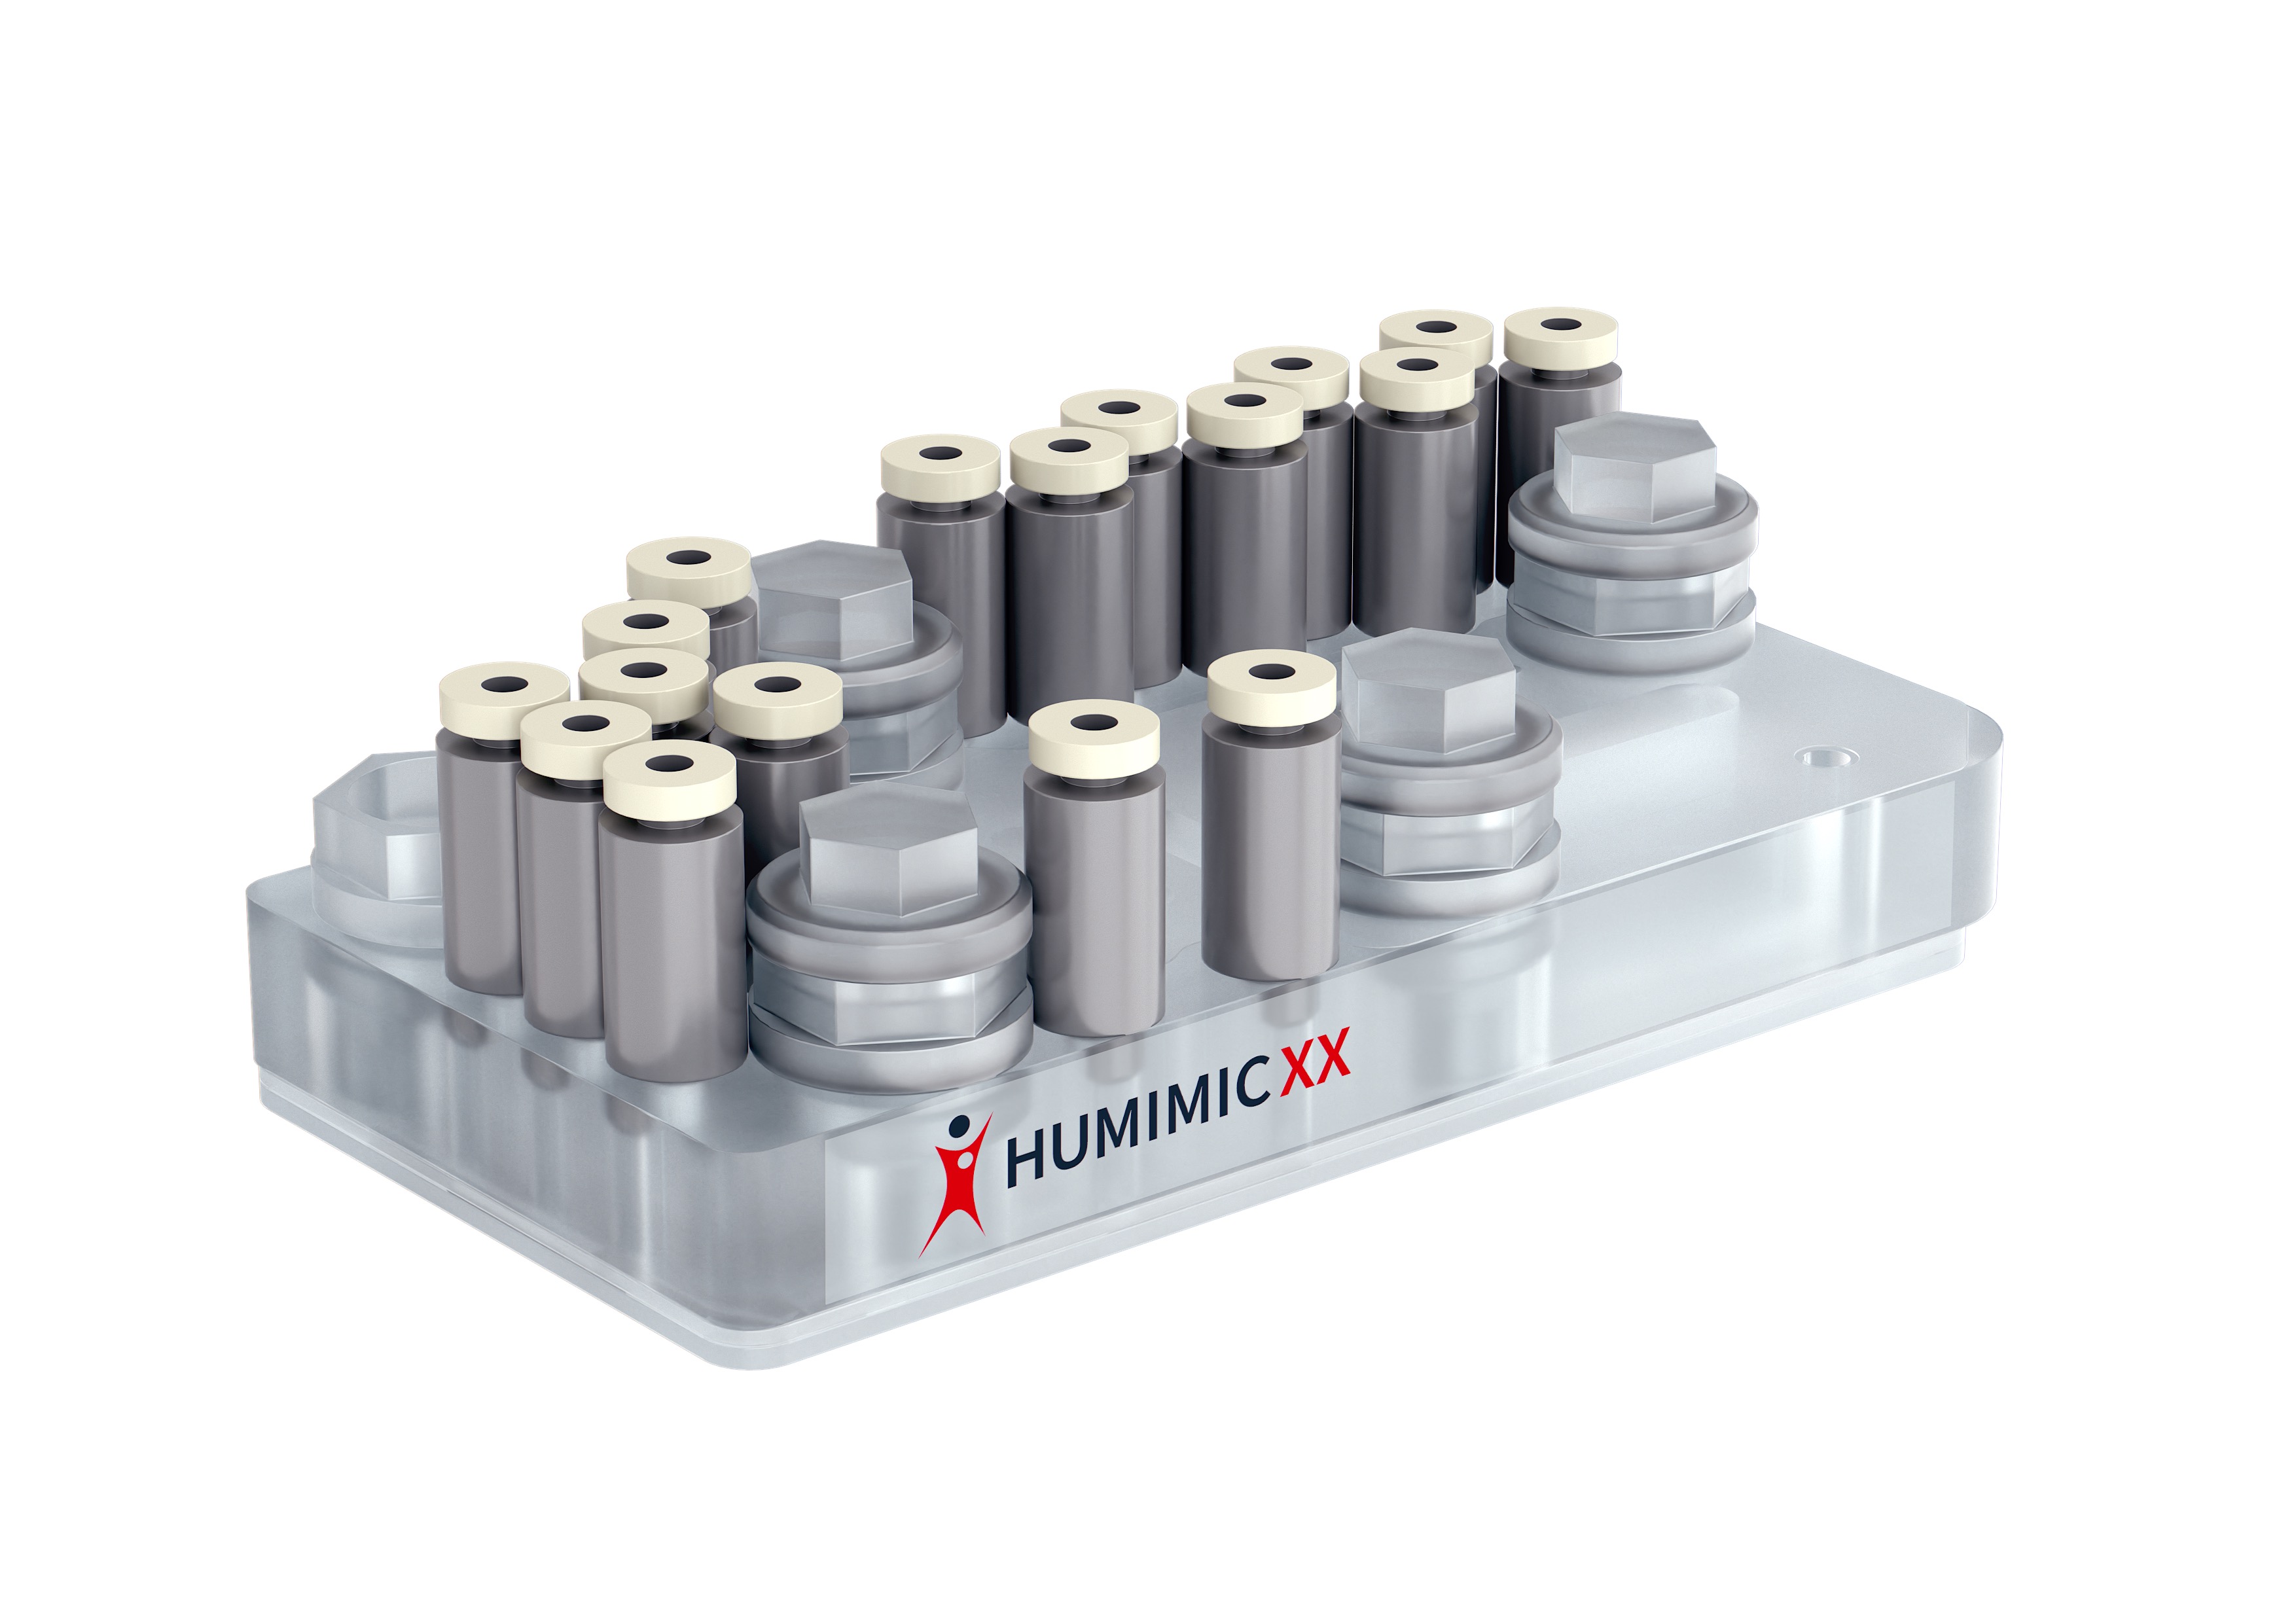 HUMIMIC ChipXX /ChipXY HUMIMIC ChipXX and HUMIMIC ChipXY will be our most potent products among our Multi-Organ-Chips. They will reproduce a systemic model of the female and male body, respectively. HUMIMIC ChipXX und HUMIMIC ChipXY have the power to model human physiology thereby generating highly predictive data sets. (In Development)